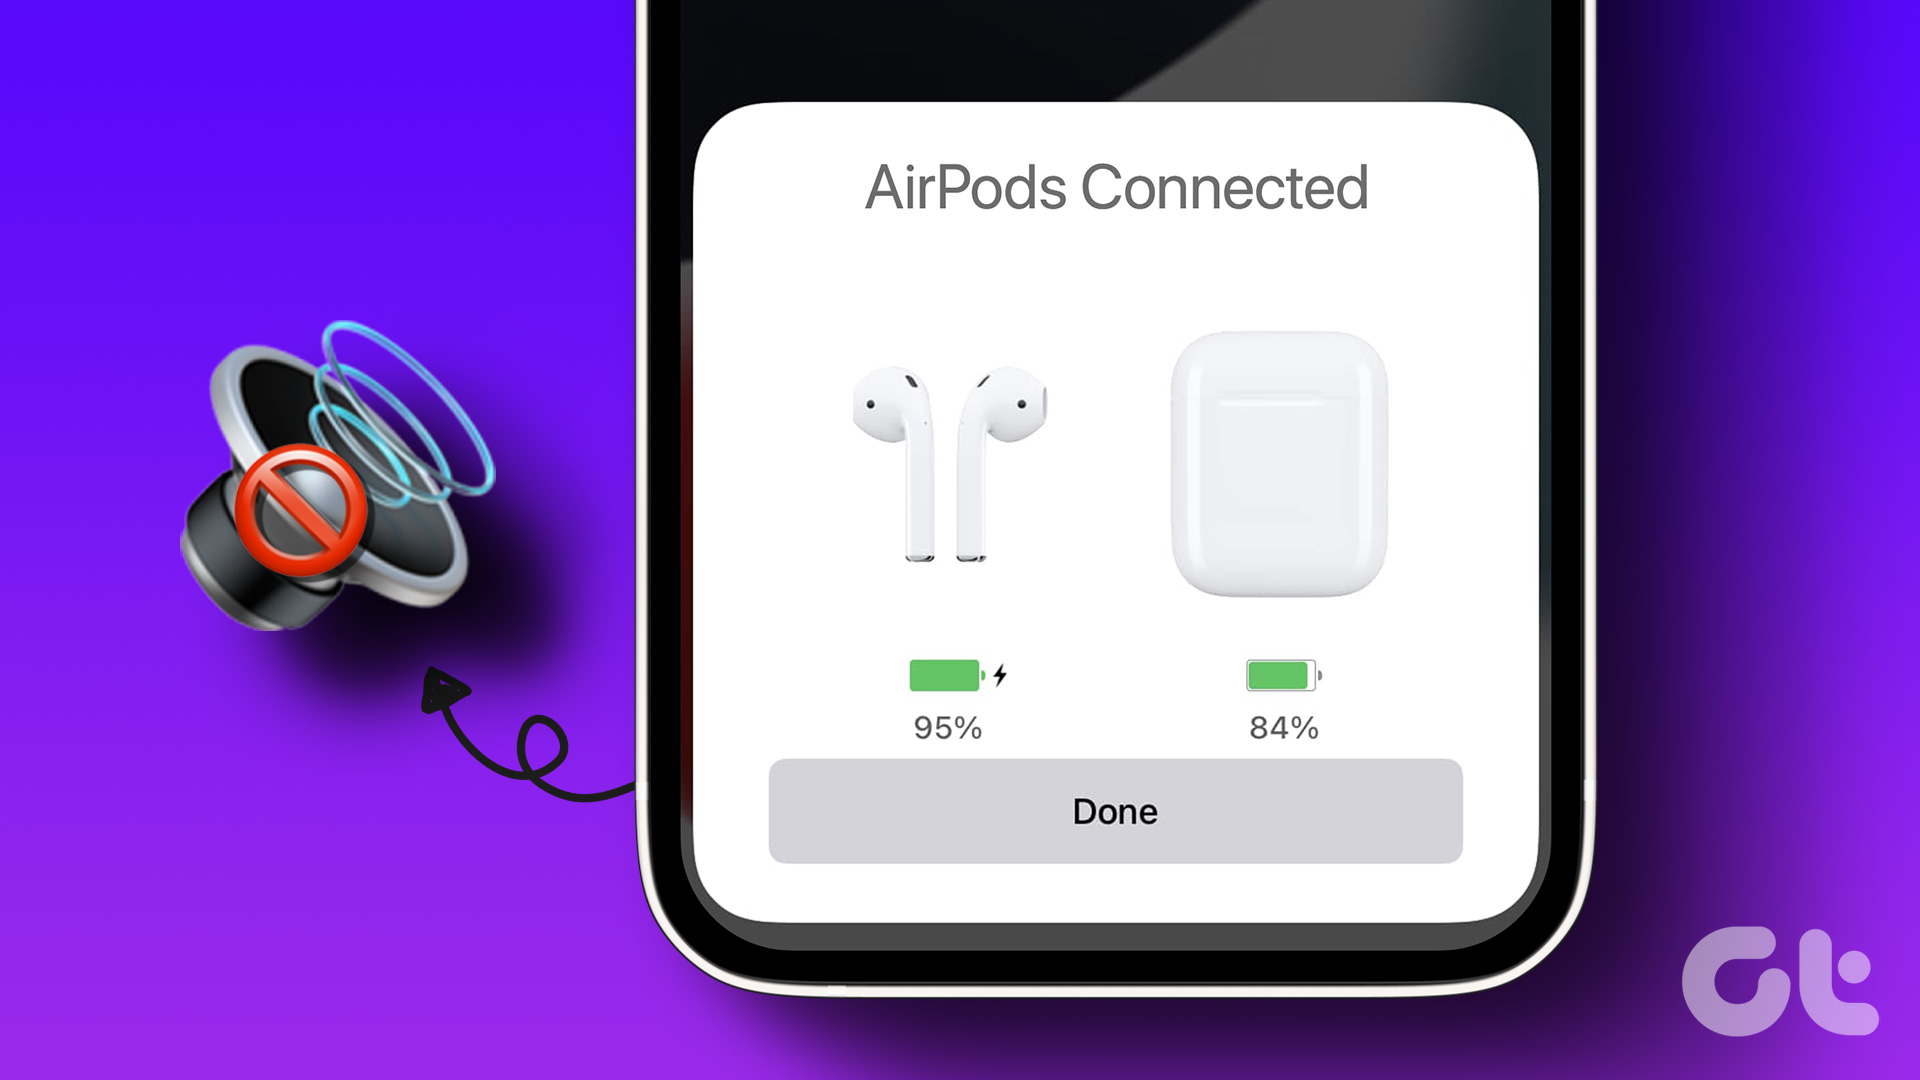 søster Elegance skæg How to Fix AirPods Connected but No Sound on Mobile and PC - Guiding Tech